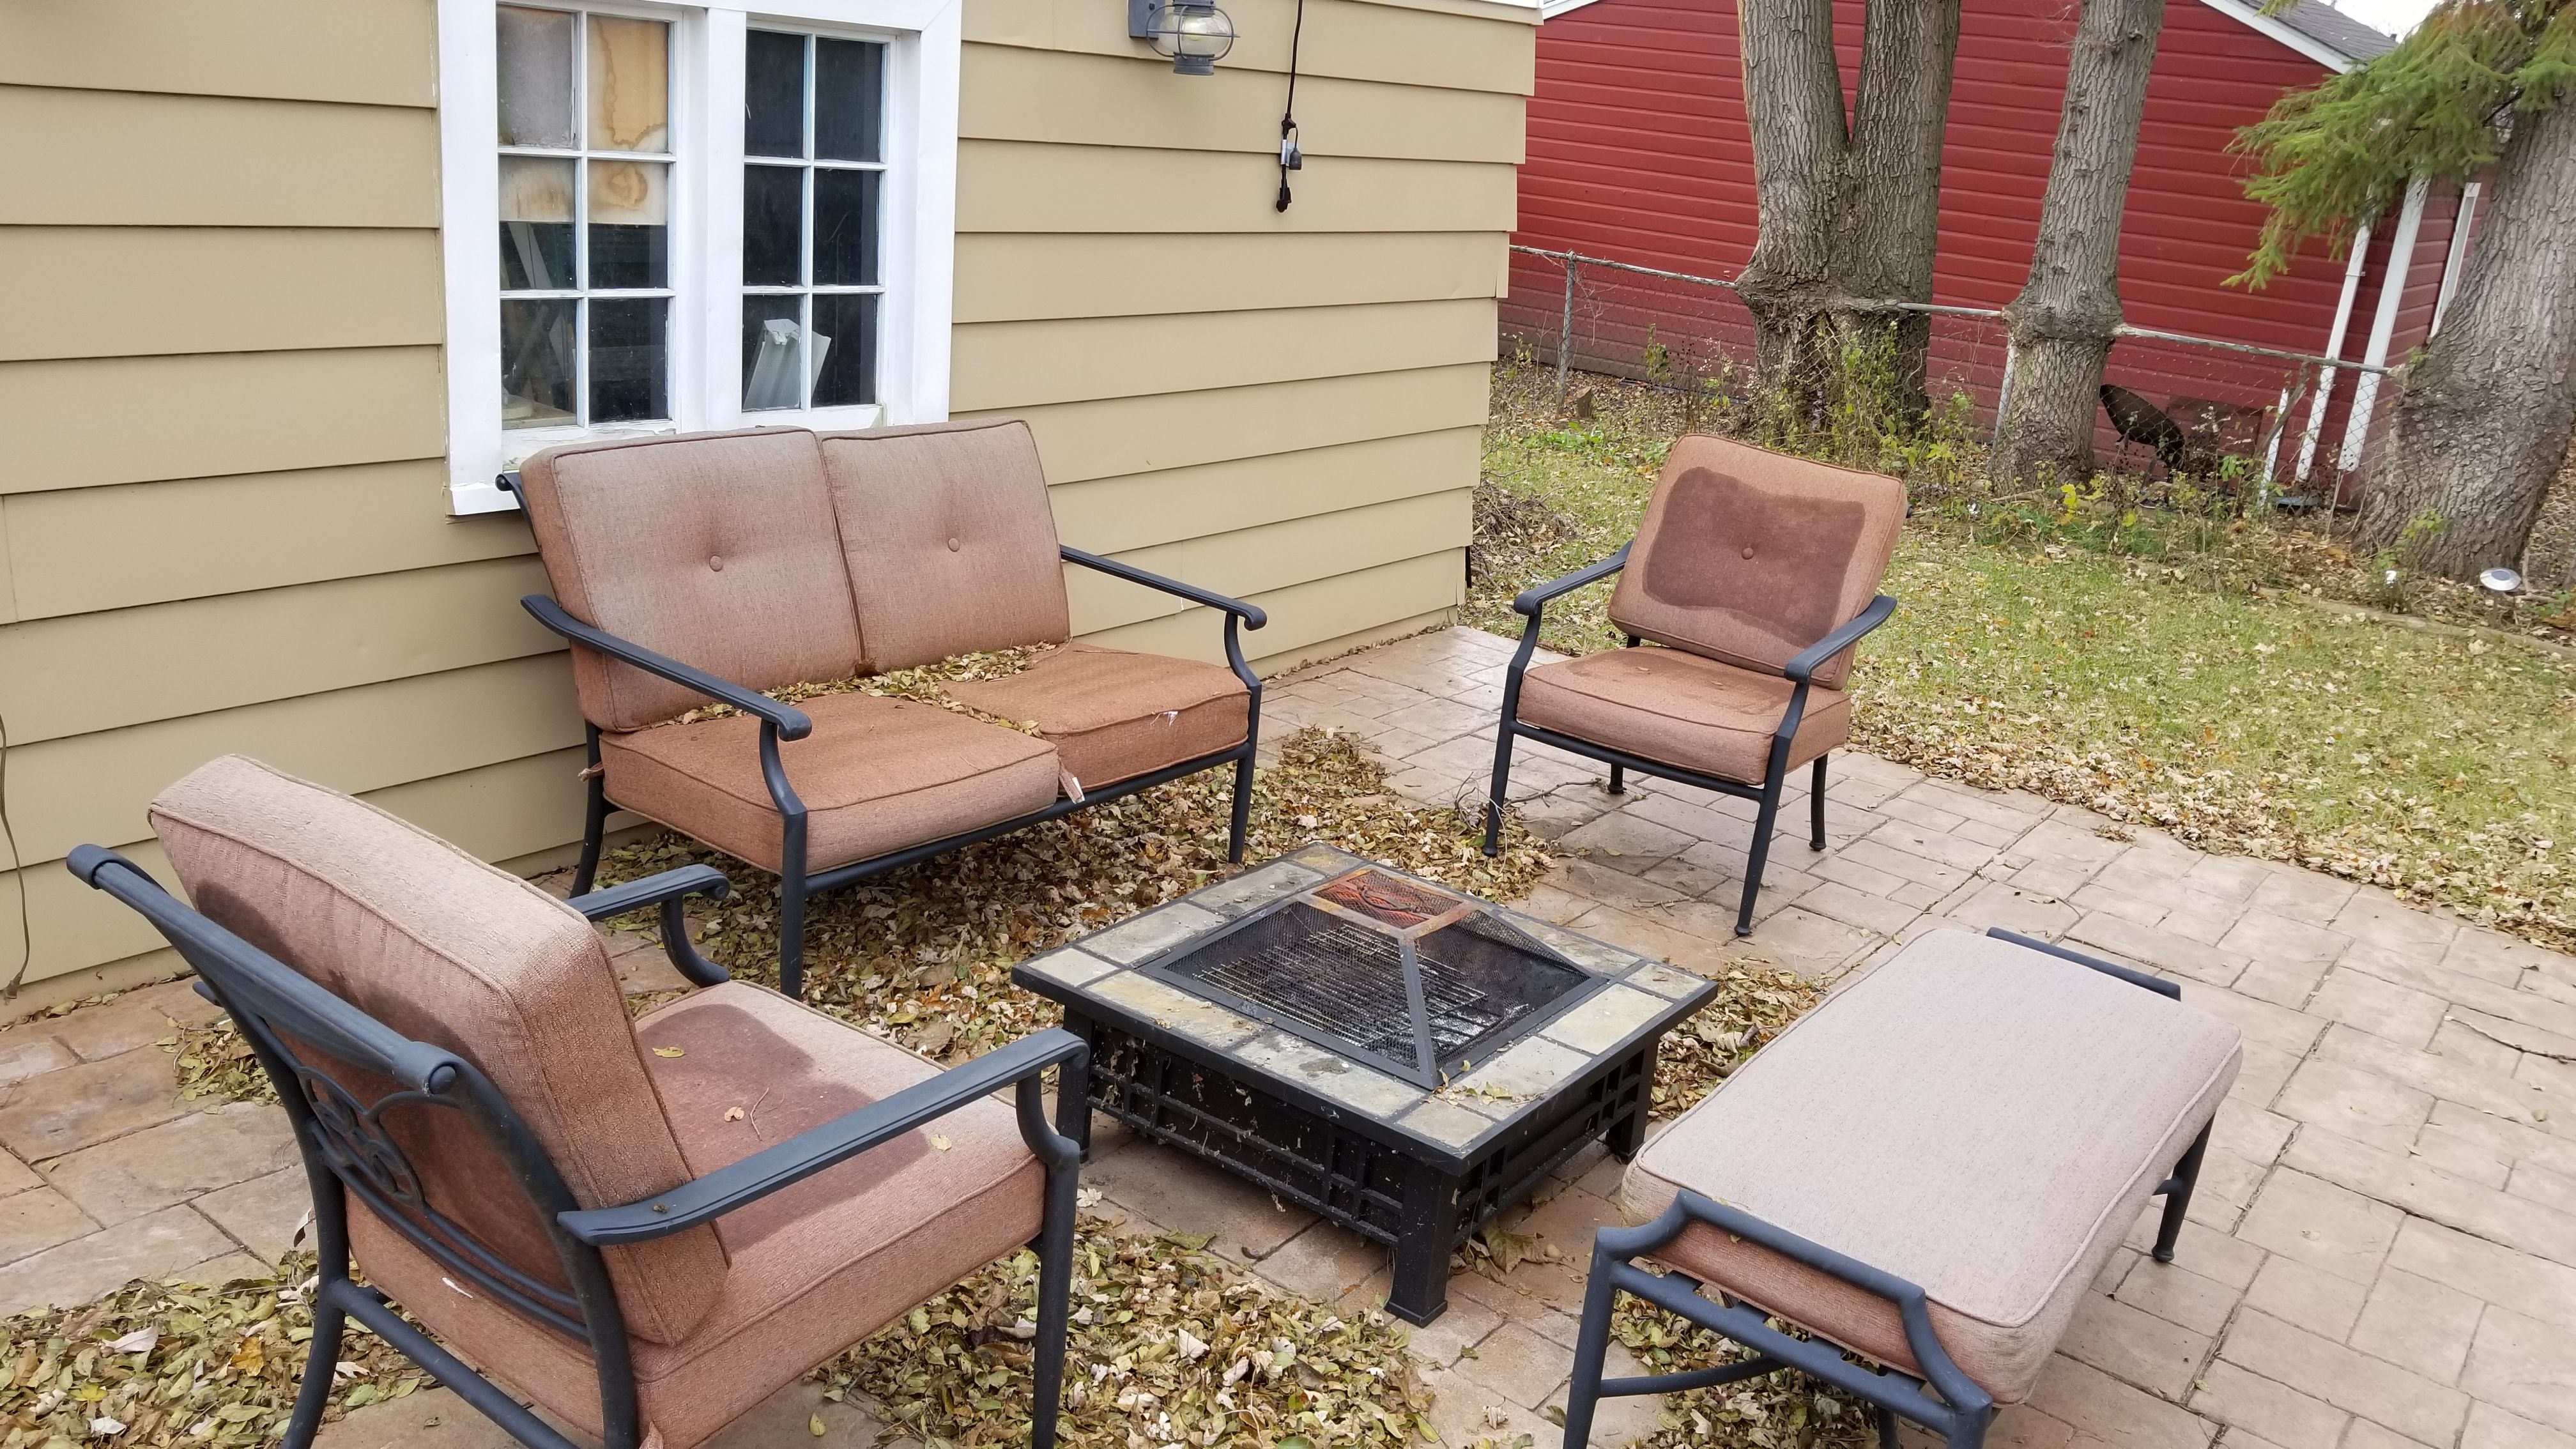 Outdoor furniture with bon fire